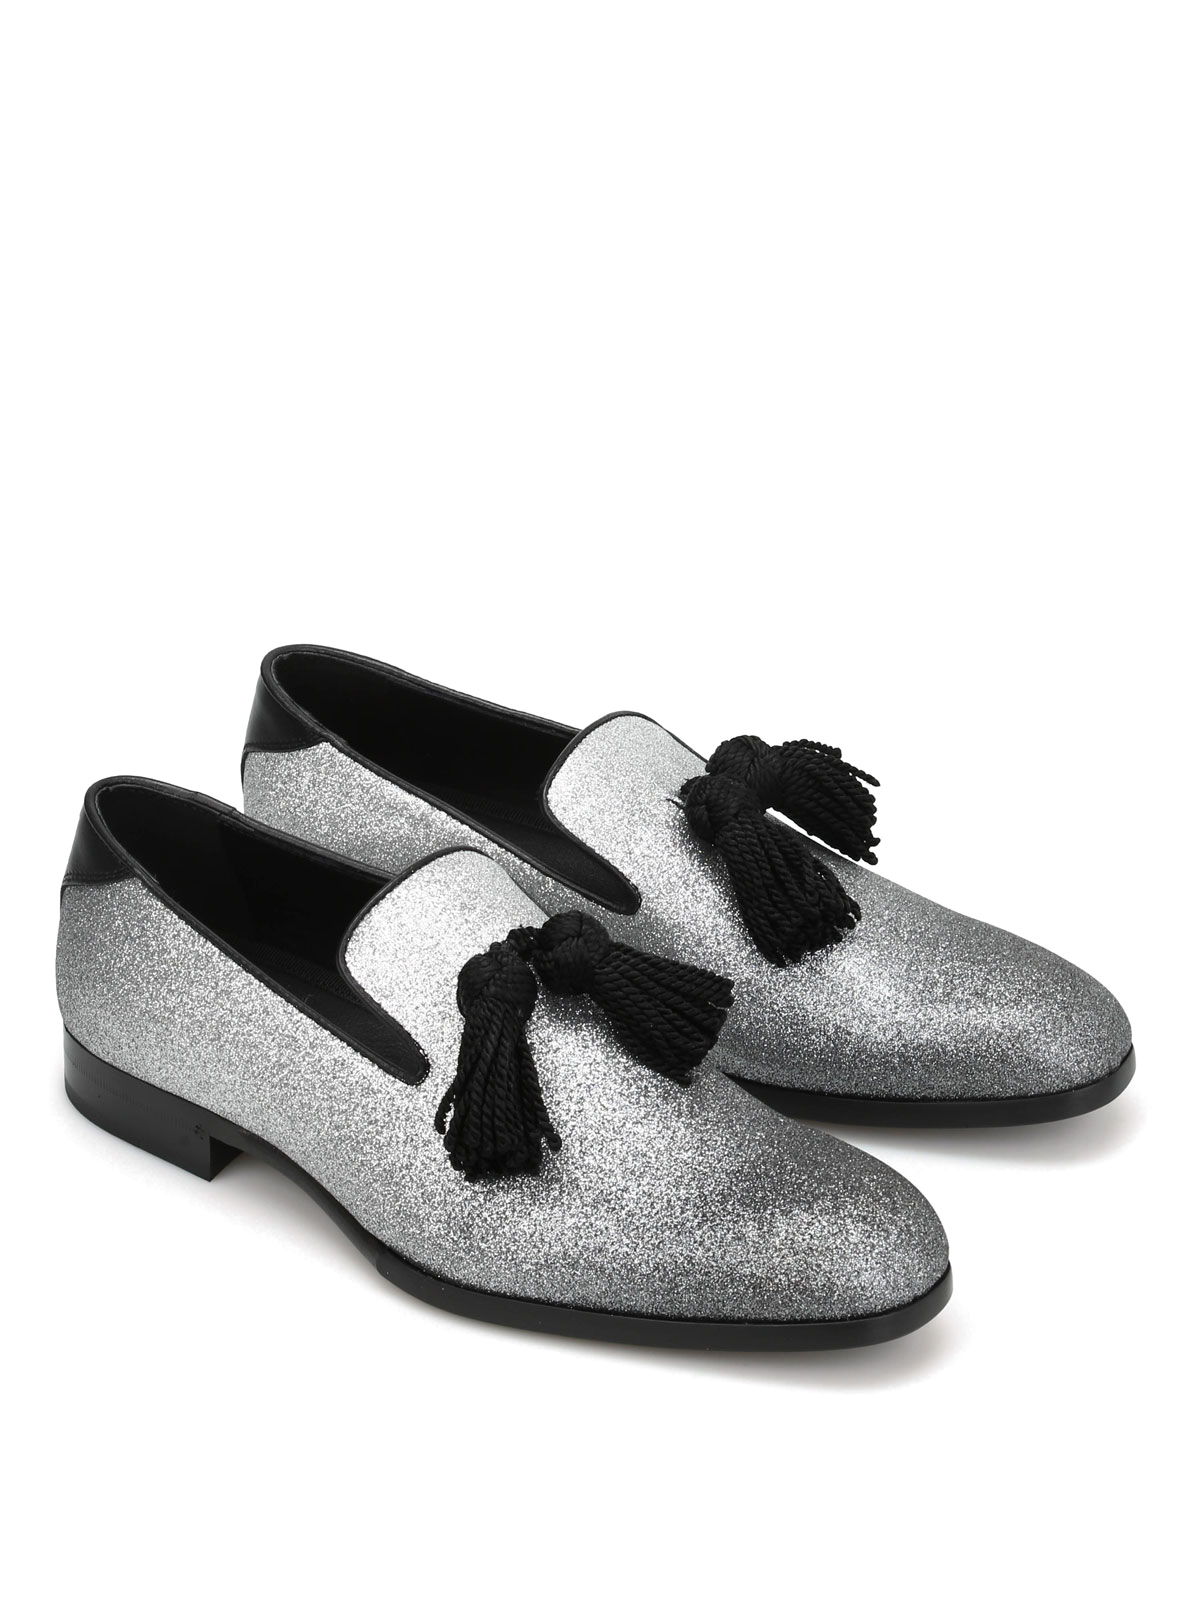 Loafers & Slippers Jimmy Choo - Foxley shaded glitter loafers 